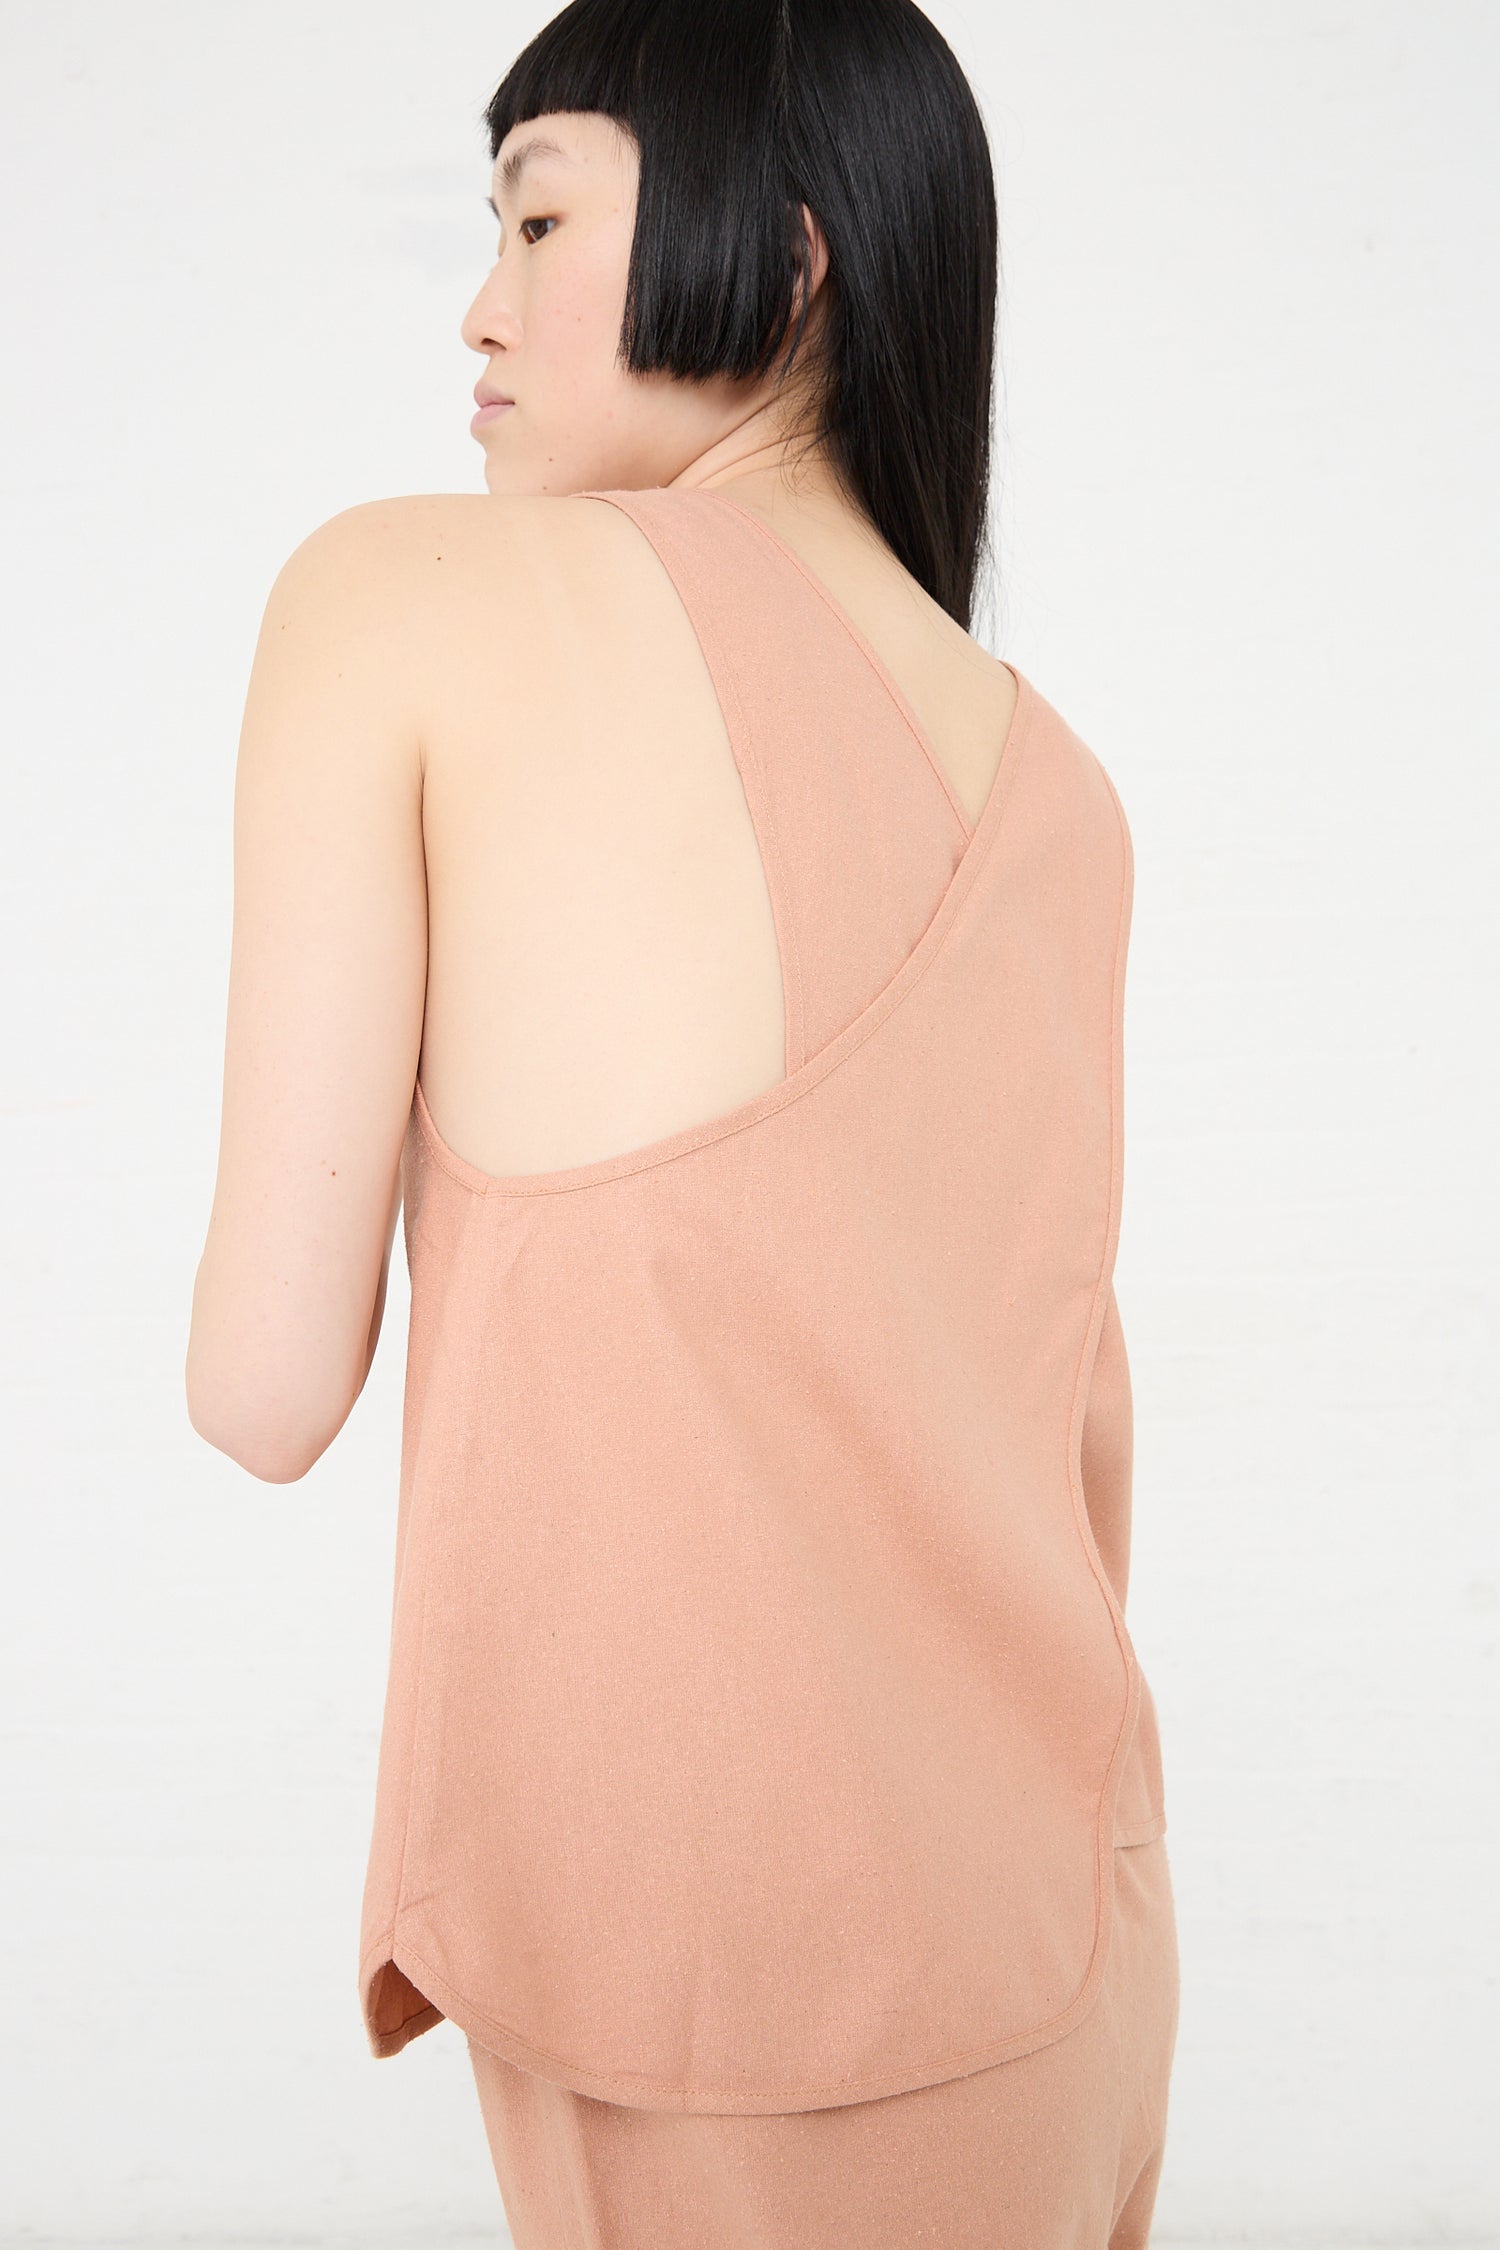 Woman wearing a sleeveless Wild Silk Apron Top in Sid Pink by Baserange, viewed from the back.